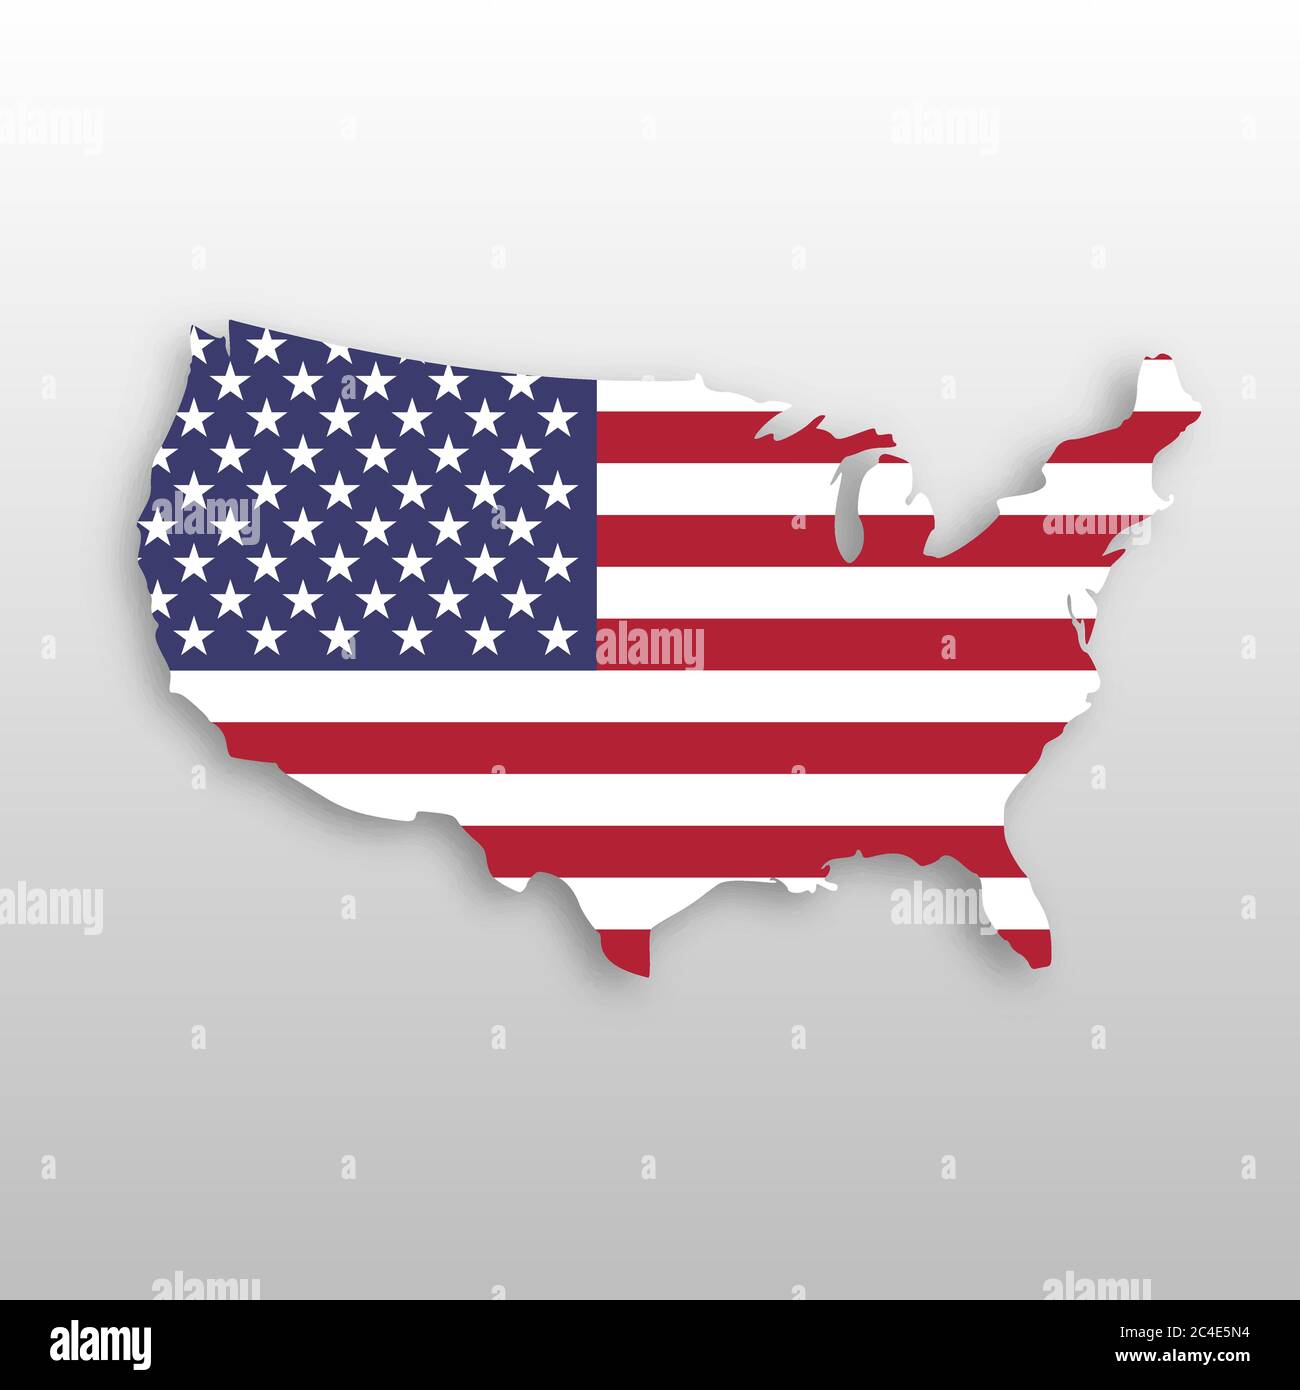 USA flag in a shape of US map silhouette. United States of America symbol. Vector illustration with dropped shadow on grey gradient background. Stock Vector